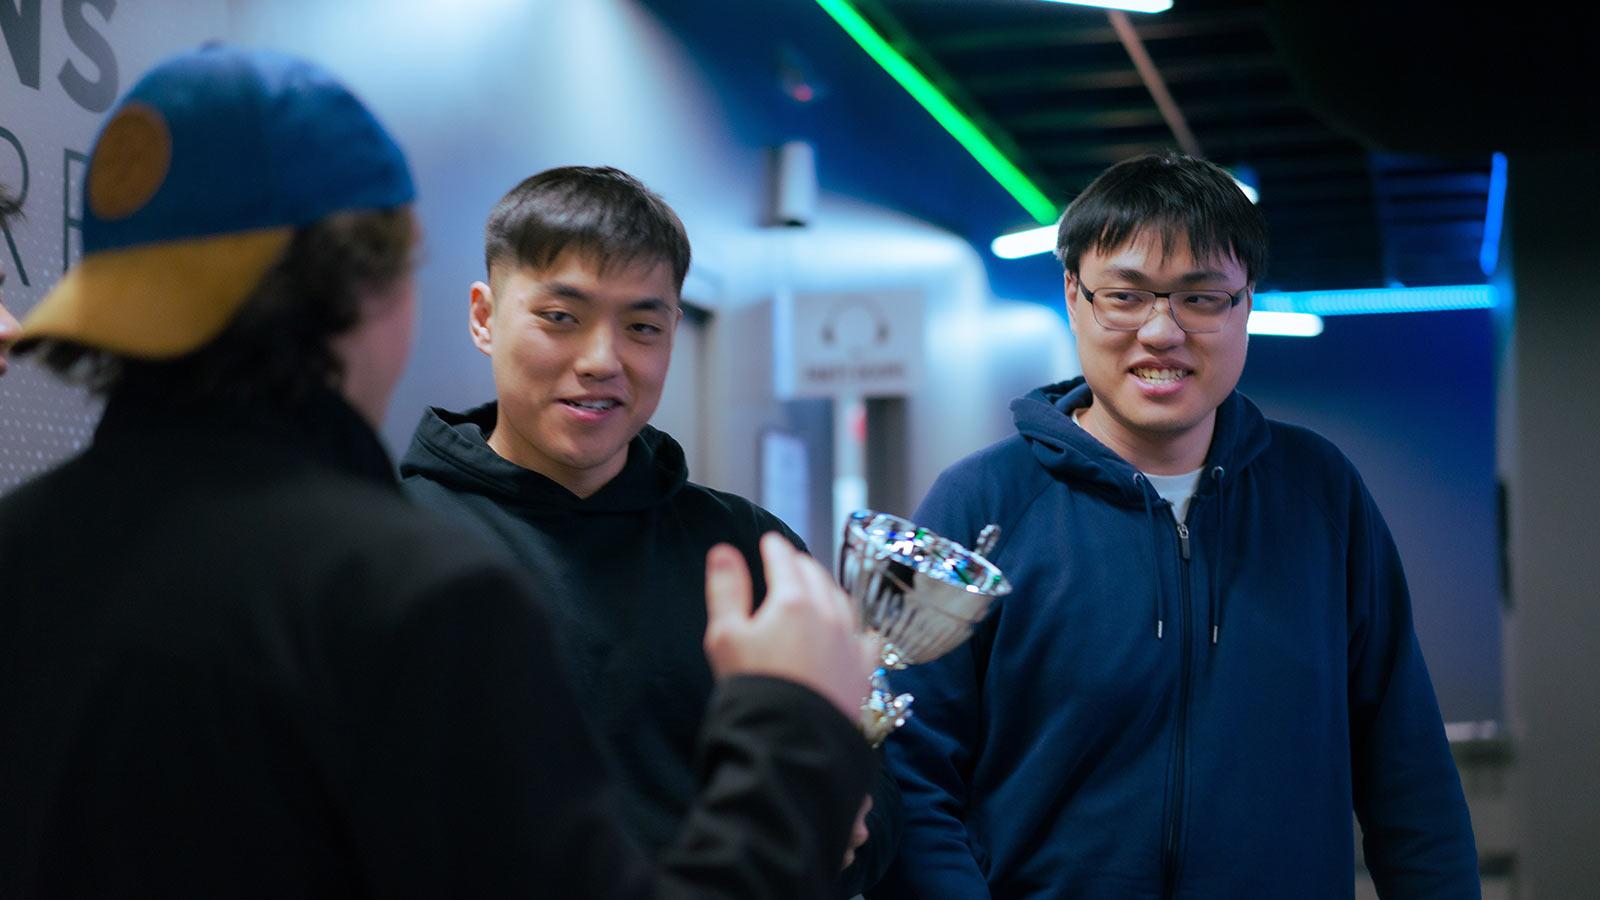 Pace Esports students smile and hold a trophy